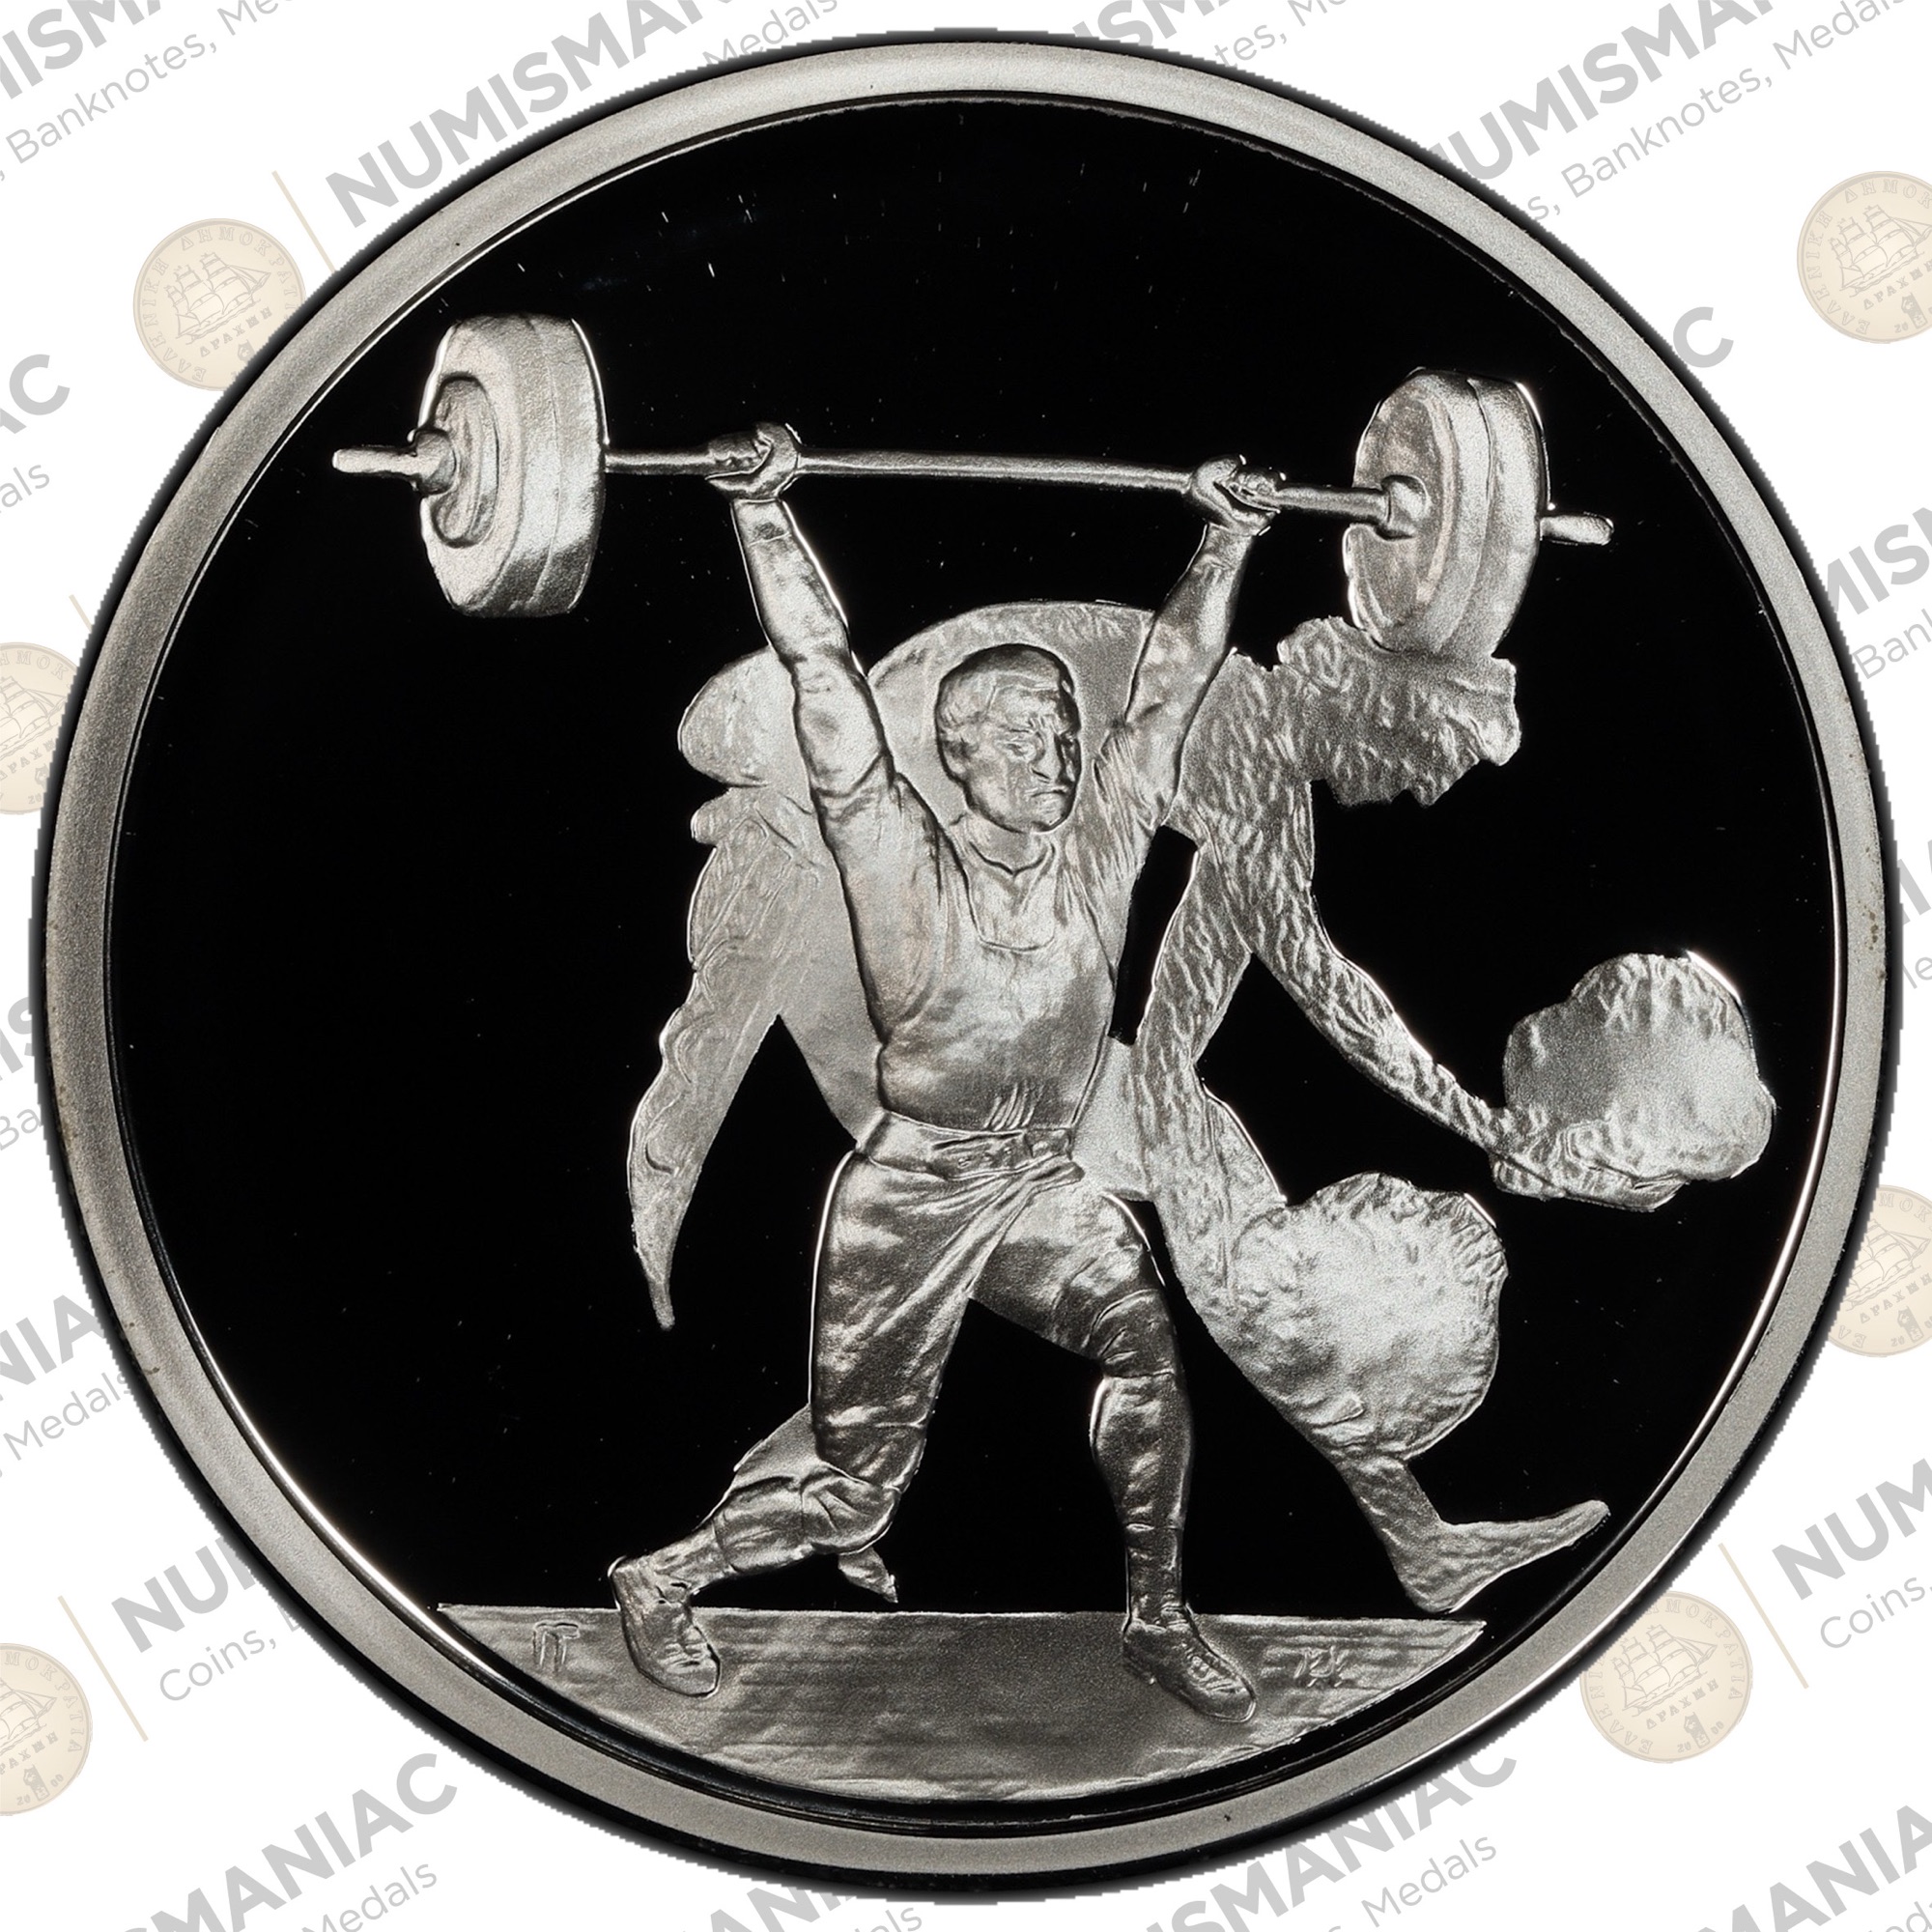 Greece 🇬🇷 10 Euro 2003 "Weightlifting" 1oz Silver Bullion Proof Coin with capsule.A